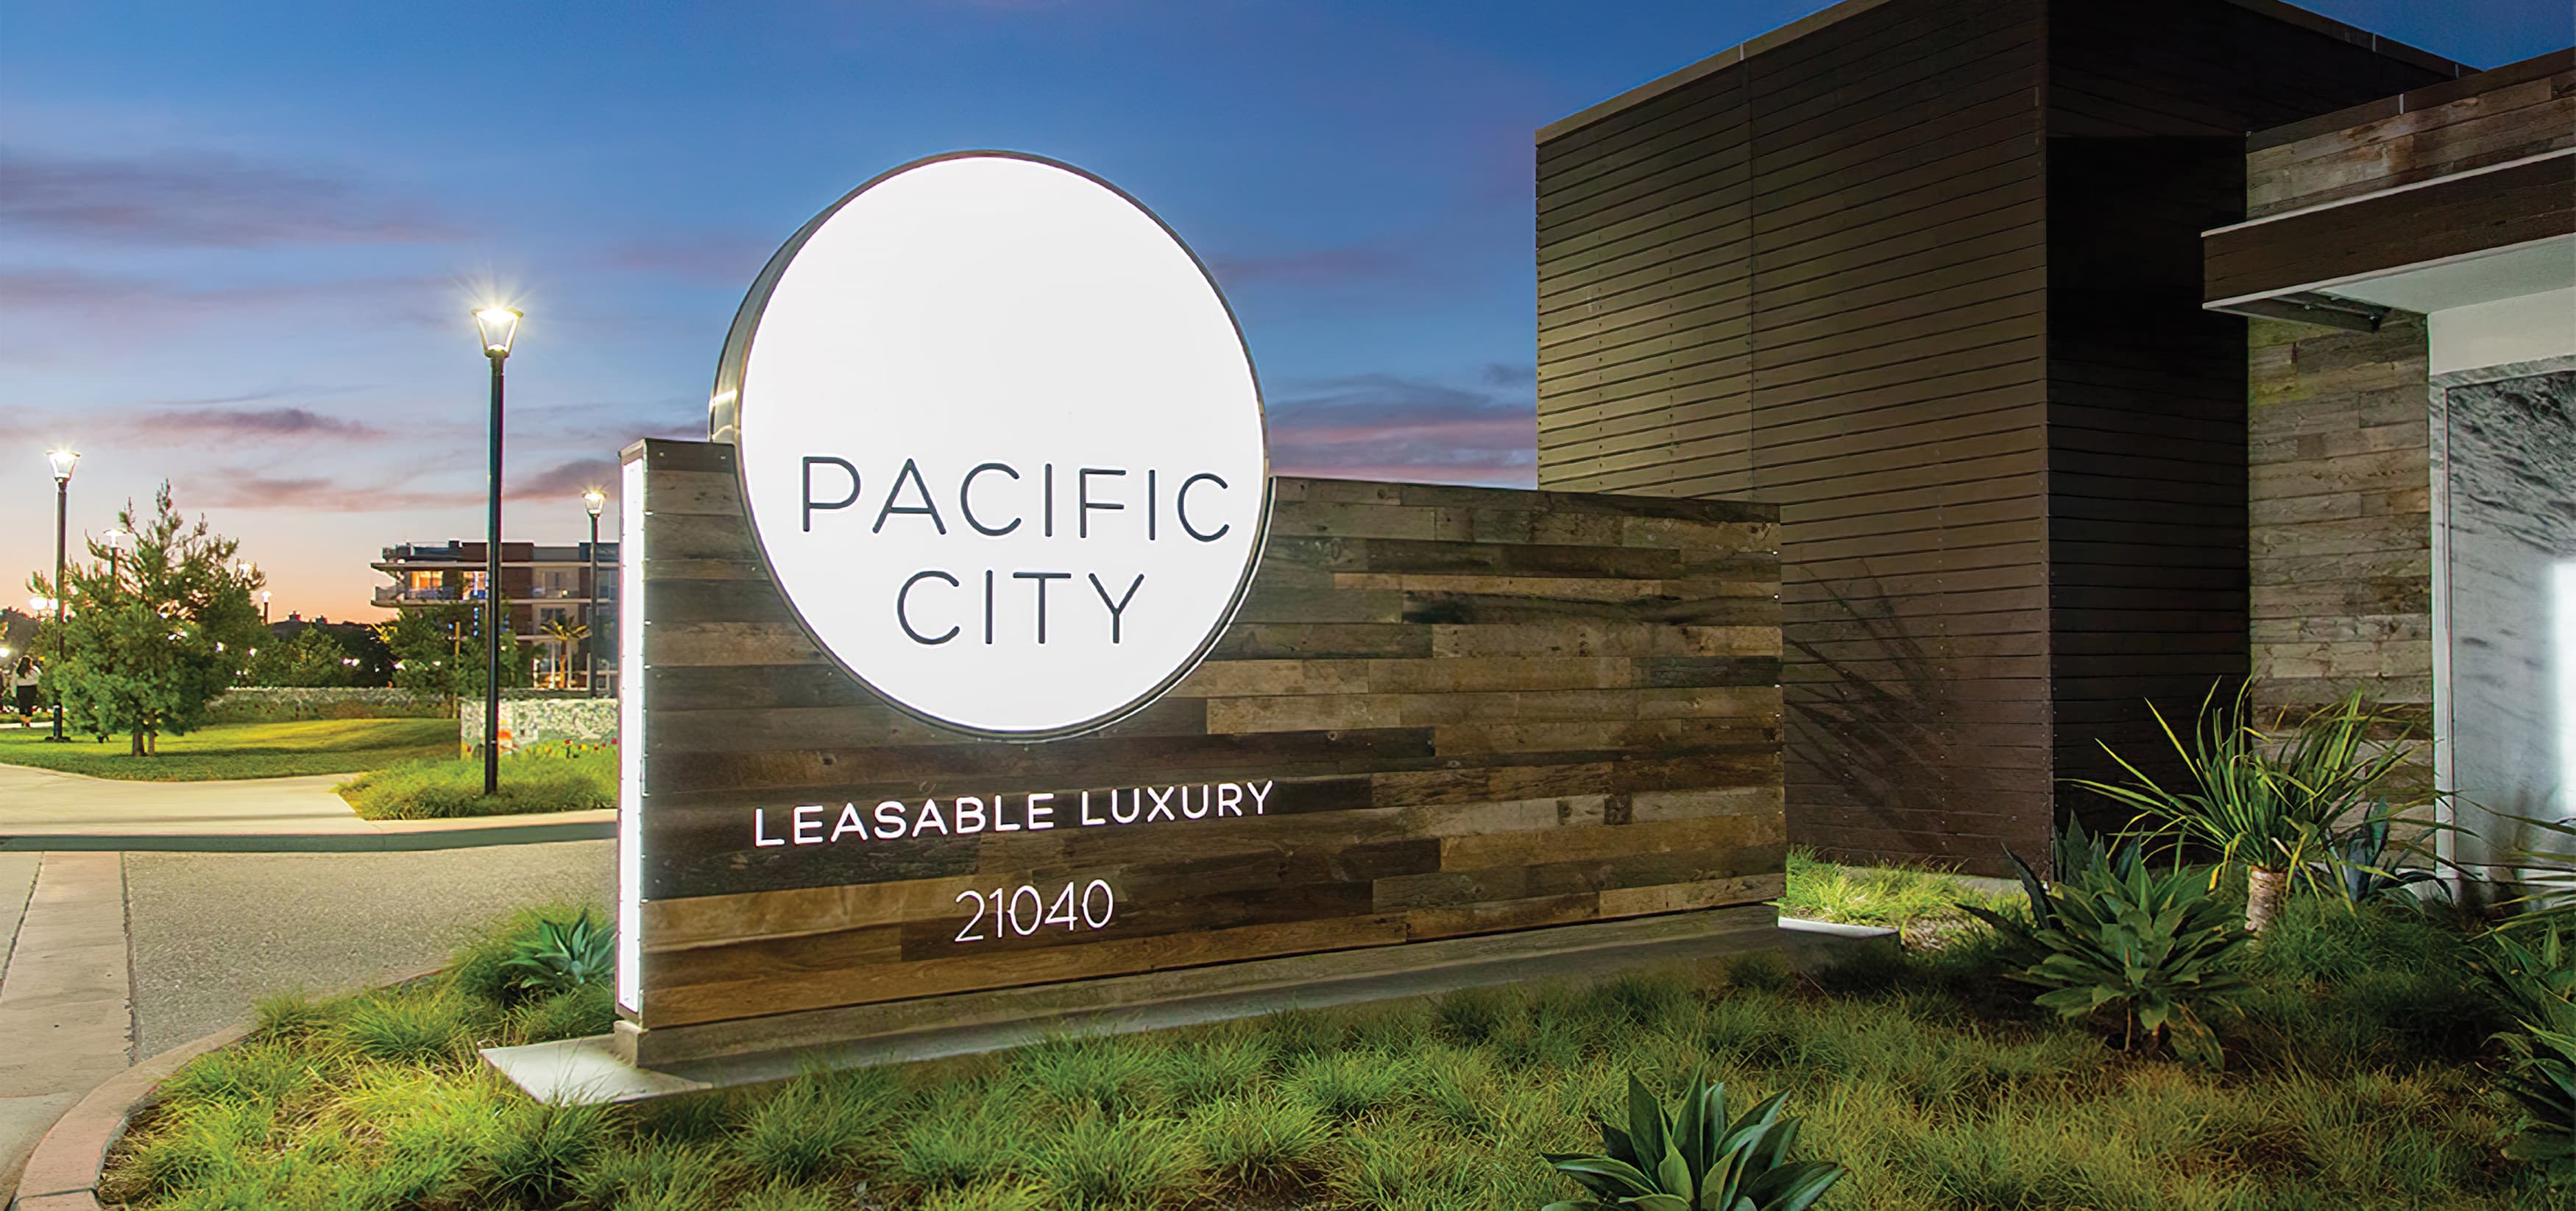 Pacific City, a luxury residential community in Huntington Beach, California. Project Identity Monument